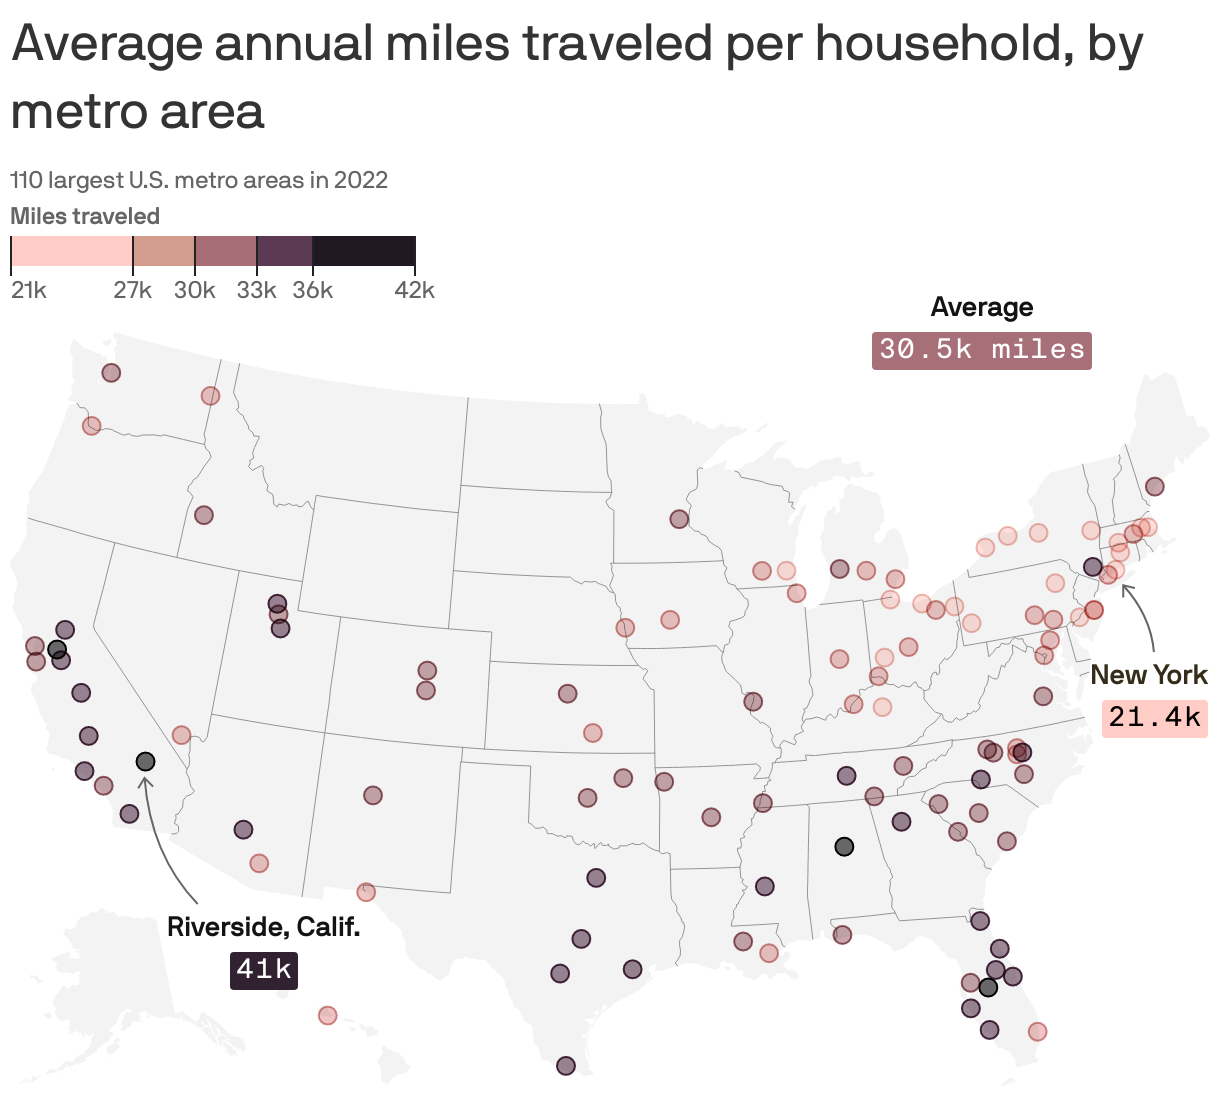 Average annual miles traveled per household, by metro area